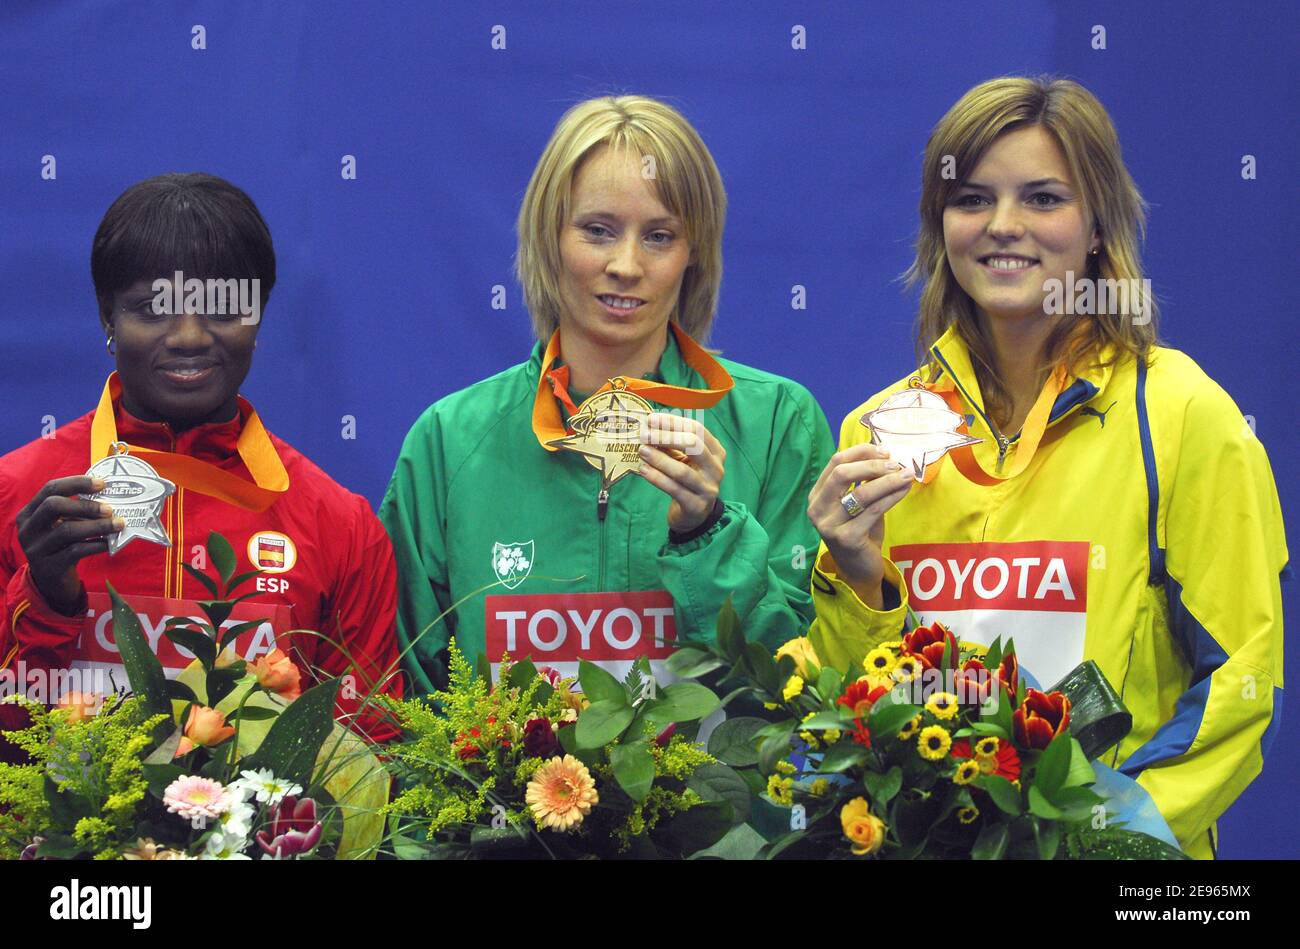 Ireland's Derval O'Rourke won the gold, Spain's Glory Alozie keep silver and Sweden's Susanna Kallur the bronze at the women 60 m hurdles at the 11th IAAF World Indoor Championships in track and field in Moscow, Russia on March 12, 2006. Photo by Christophe Guibbaud/Cameleon/ABACAPRESS.COM Stock Photo